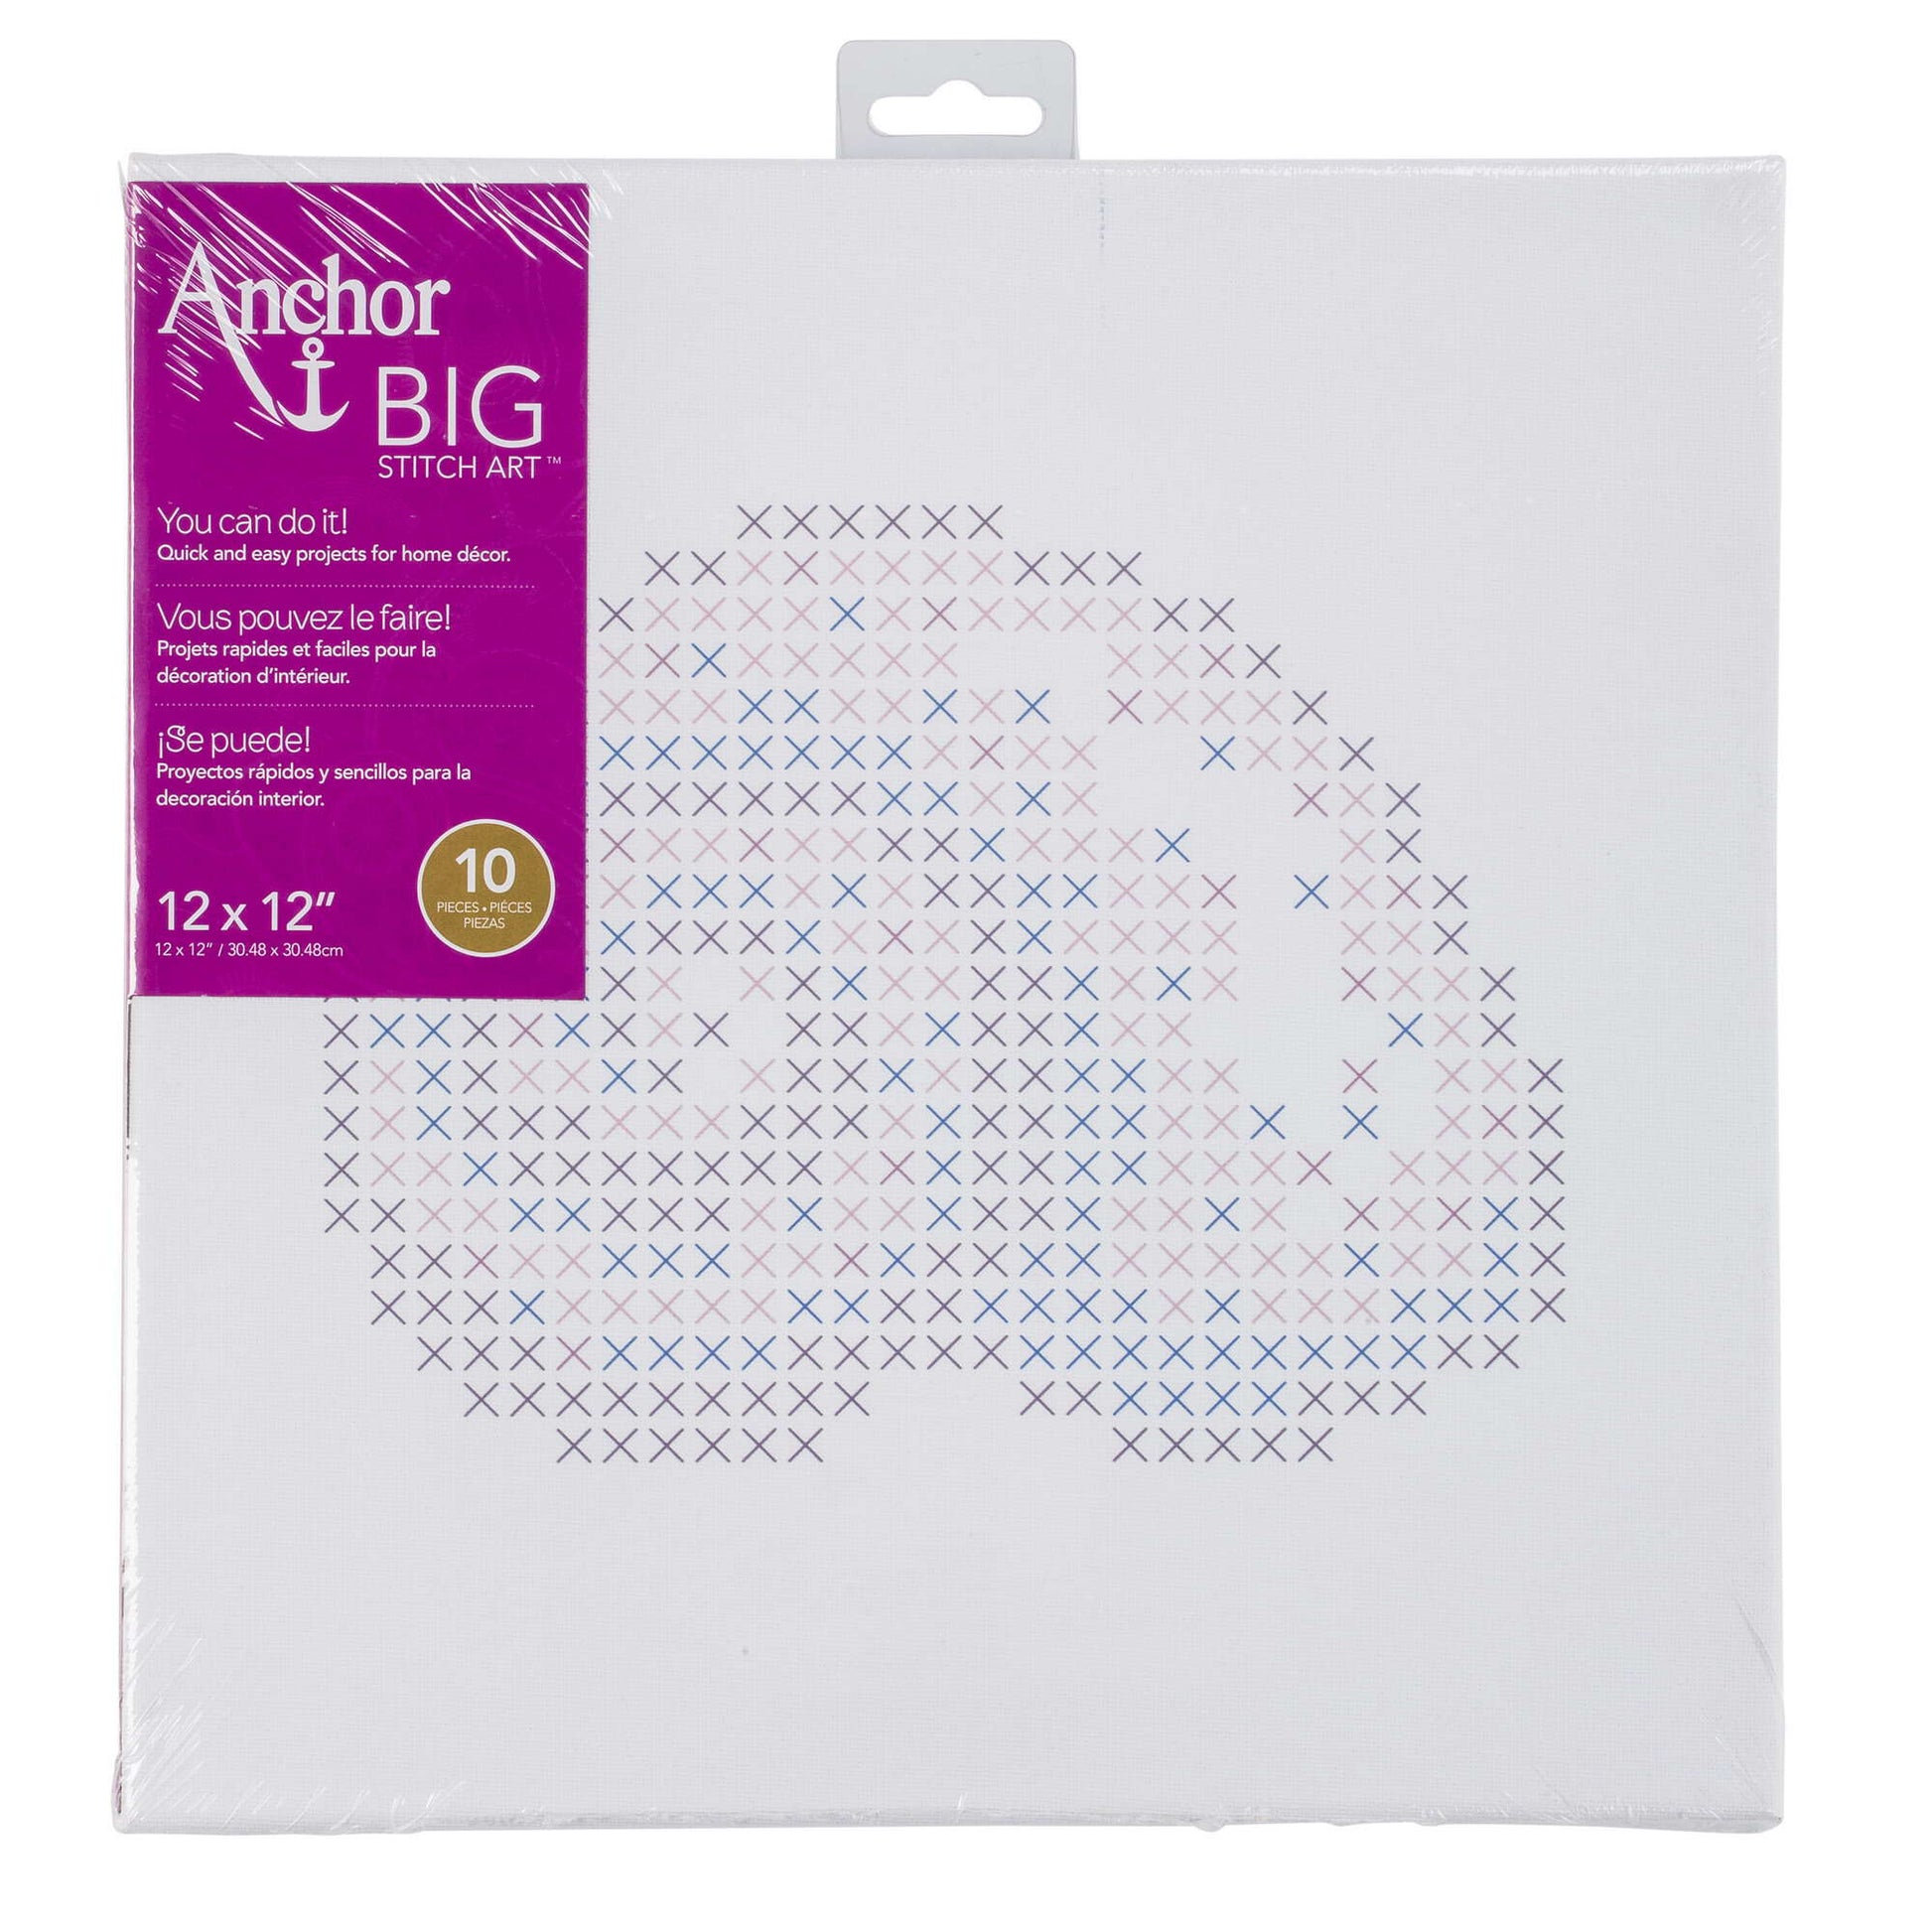 Anchor Big Stitch Art 12" x 12" - Discontinued Items Conical